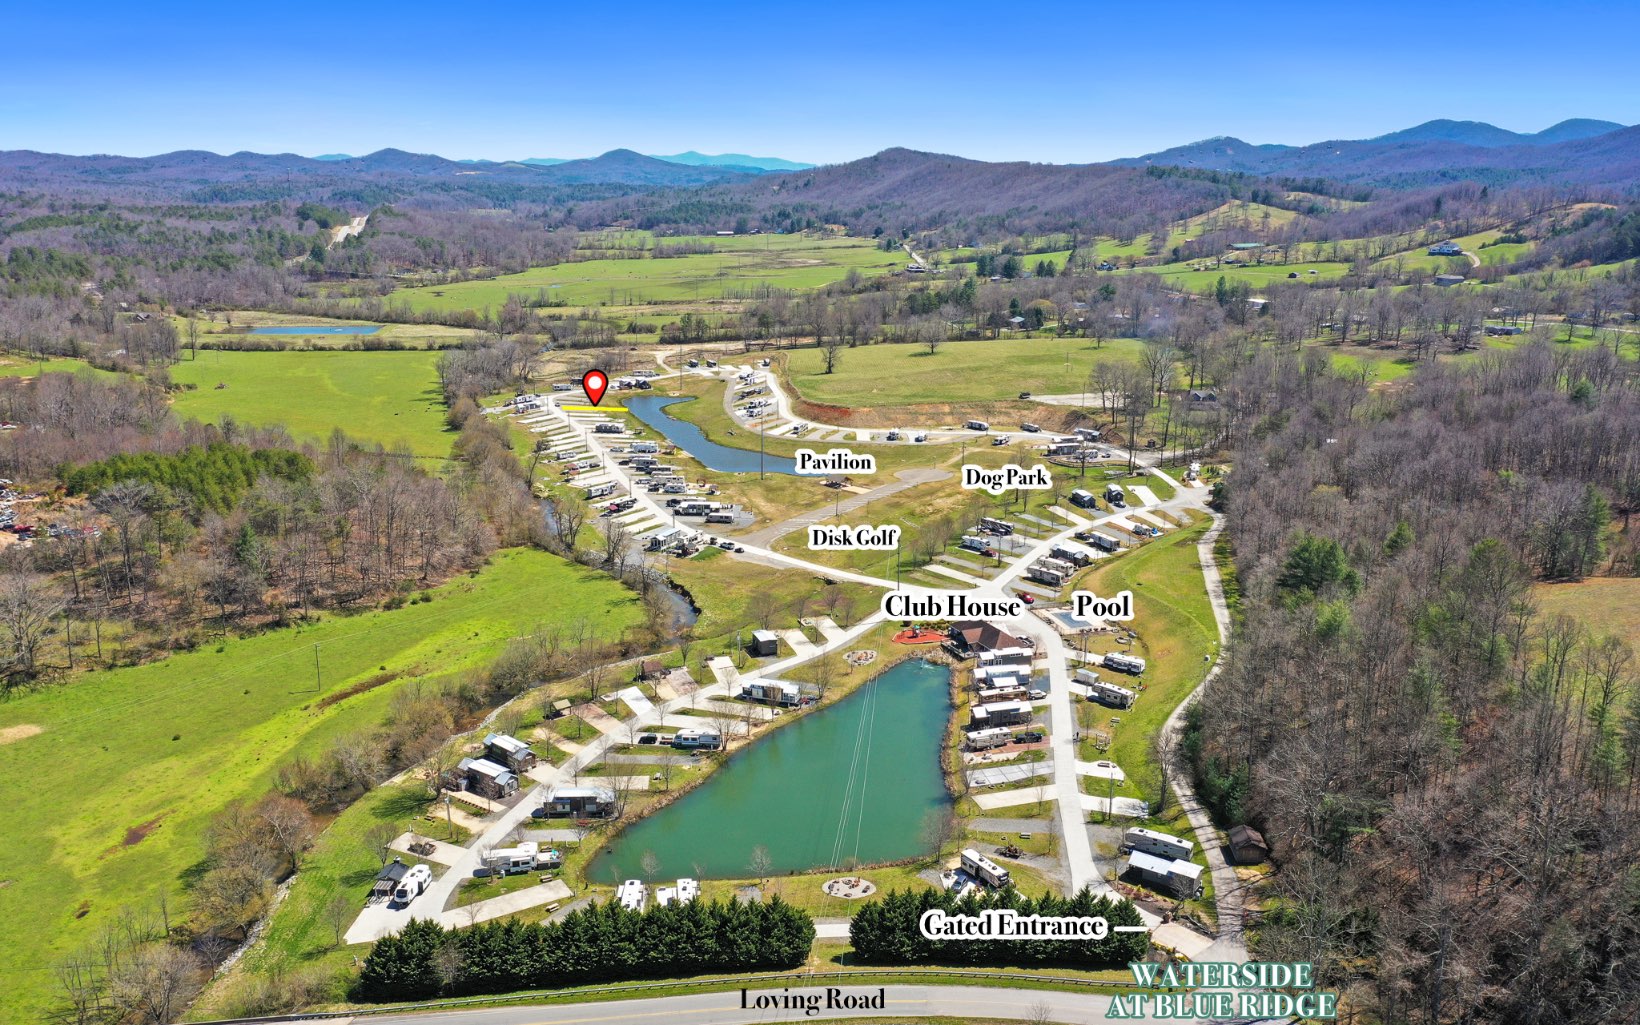 ESCAPE TO WATERSIDE AT BLUE RIDGE. Just Minutes from downtown Blue Ridge this gated RV and Tiny Home Community offers it all. Clubs House,Playground, Community pool, Community fire pits, Hot tub,Laundry Facility, and surrounded by the Chattahoochee National Forest. Community Kitchen with Wood Fired Pizza Oven, Fire Pits, Kayak Racks and Tubing. Don't forget a dog park for your furry best friends! Build a Tiny Home or bring your RV. Income possibilities are endless. Make North Georgia your getaway in the Mountains. This site is located in Phase 2. https://www.watersidegeorgia.com/site-map/